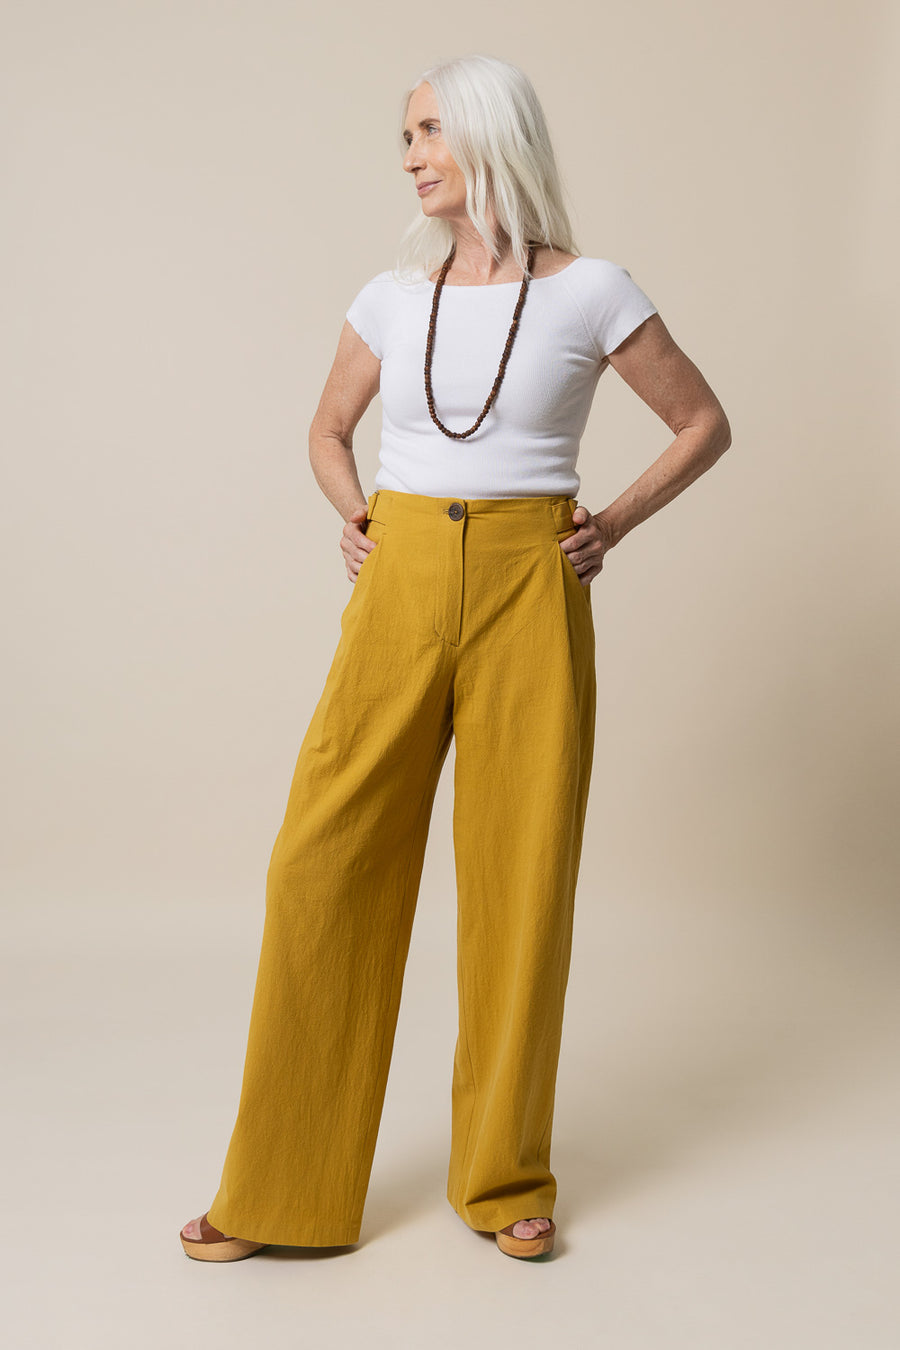 Palazzo Pants PATTERN Digital Pdf Video Tutorial, Wide Leg Trousers,  Adjustable, Drawstring, Pleated, Front Pleat, Tailored, Sewing 